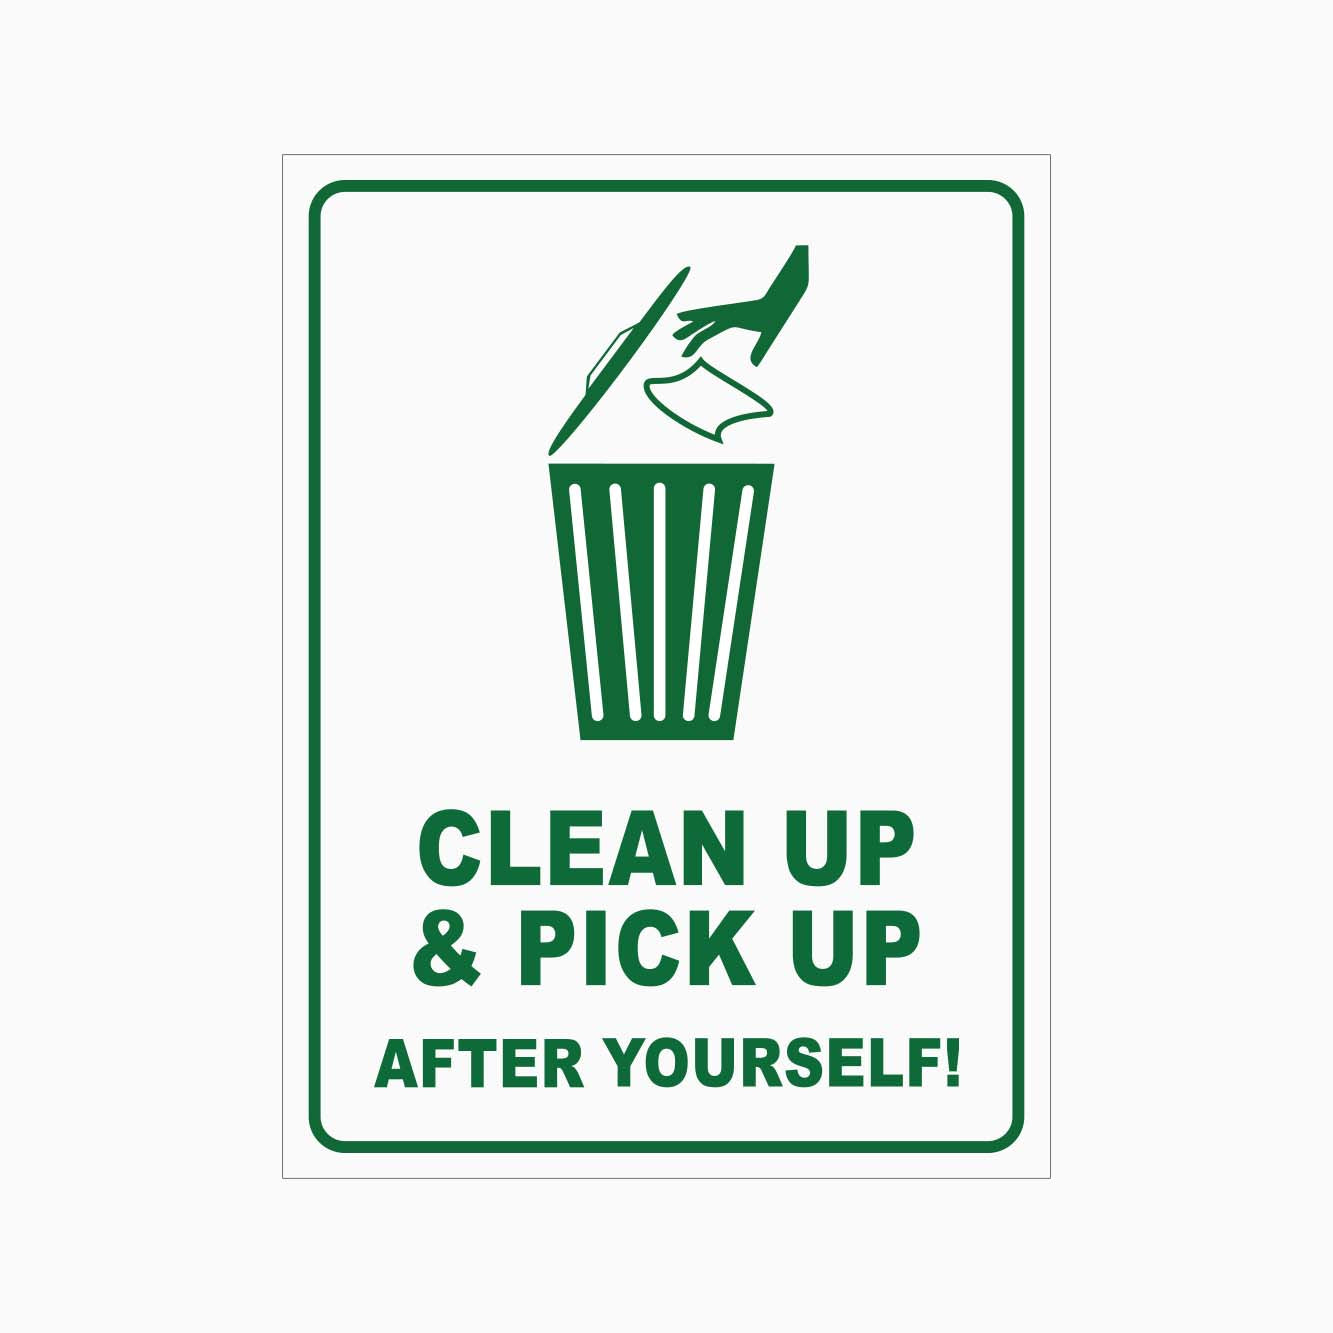 CLEAN UP AND PICK UP AFTER YOUR SELF SIGN - GET SIGNS